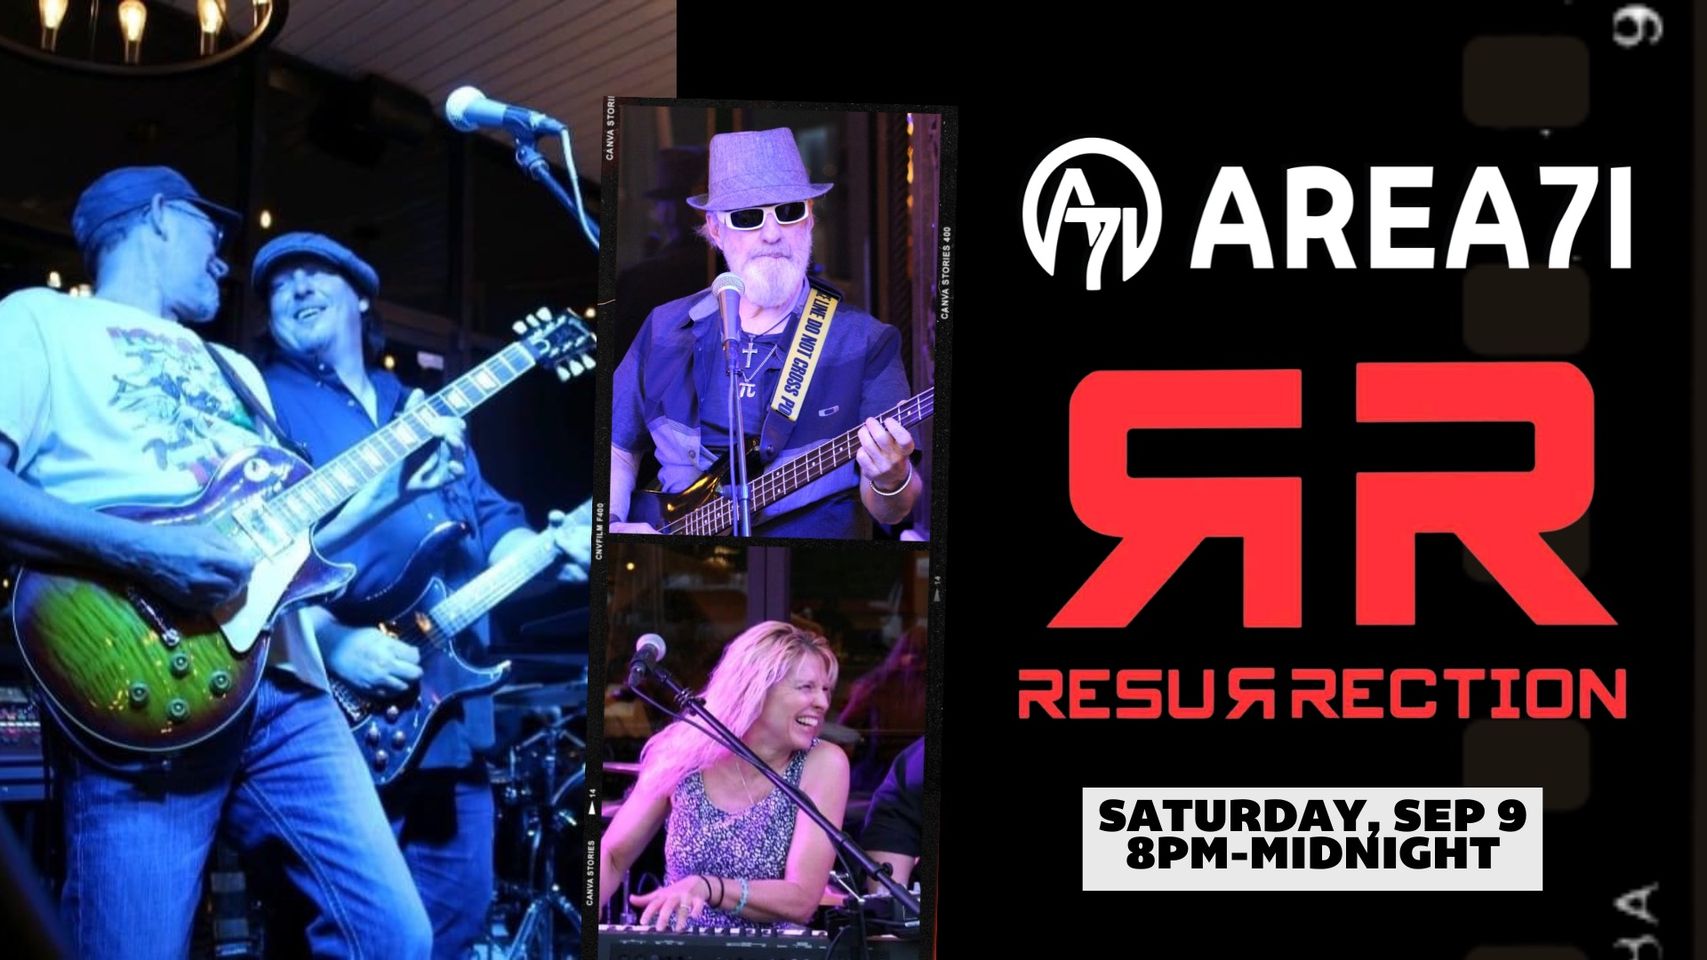 Resurrection - Classic Rock Band at Area71